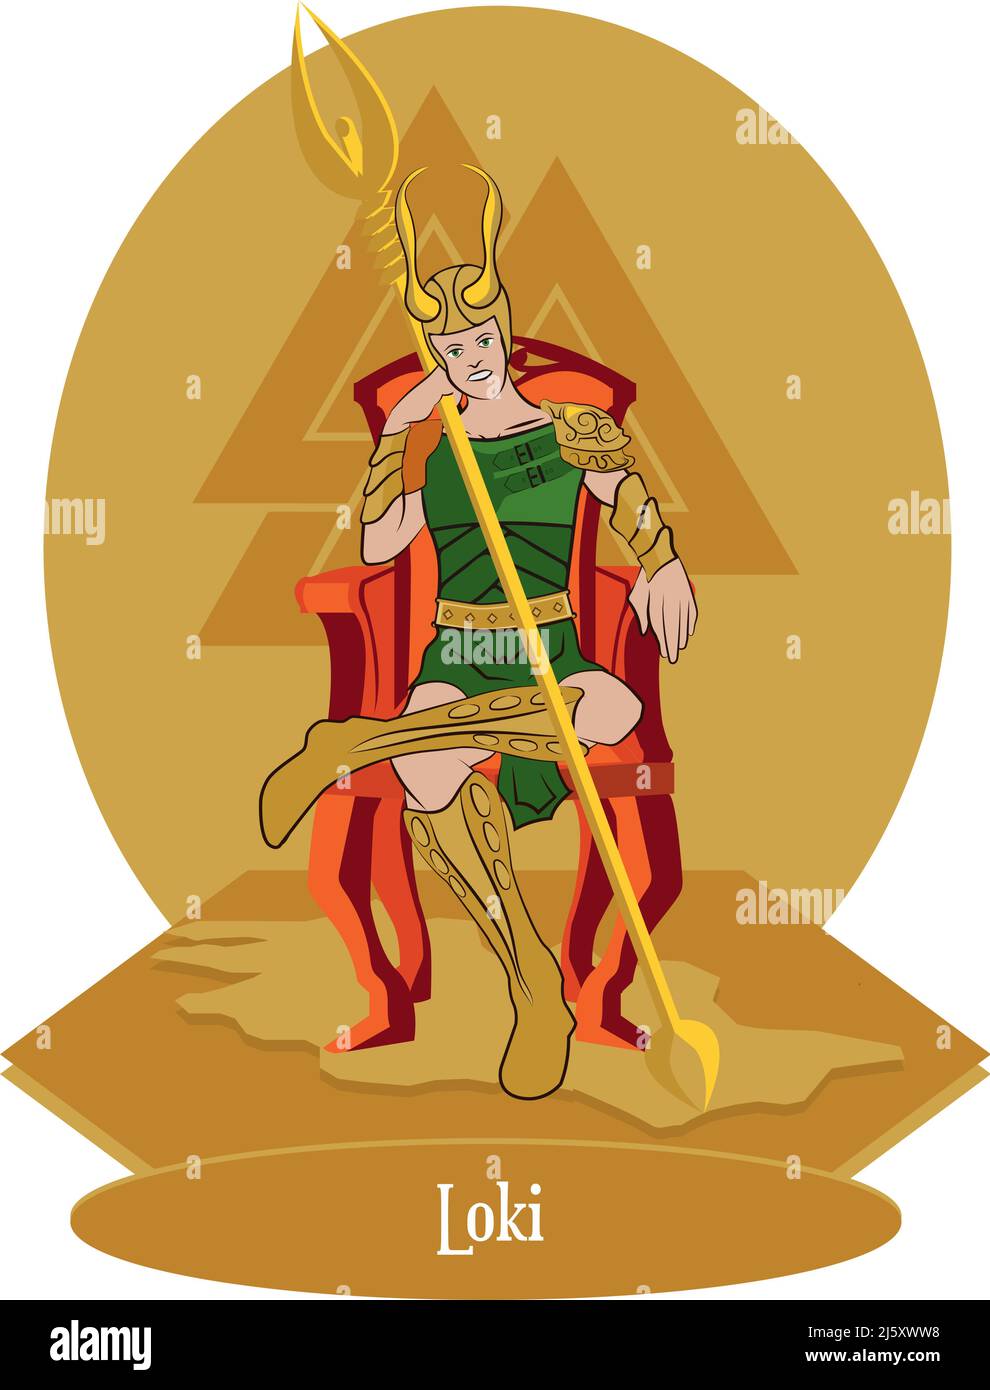 Illustration vector isolated of Norse or Scandinavian mythical god, Loki Stock Vector